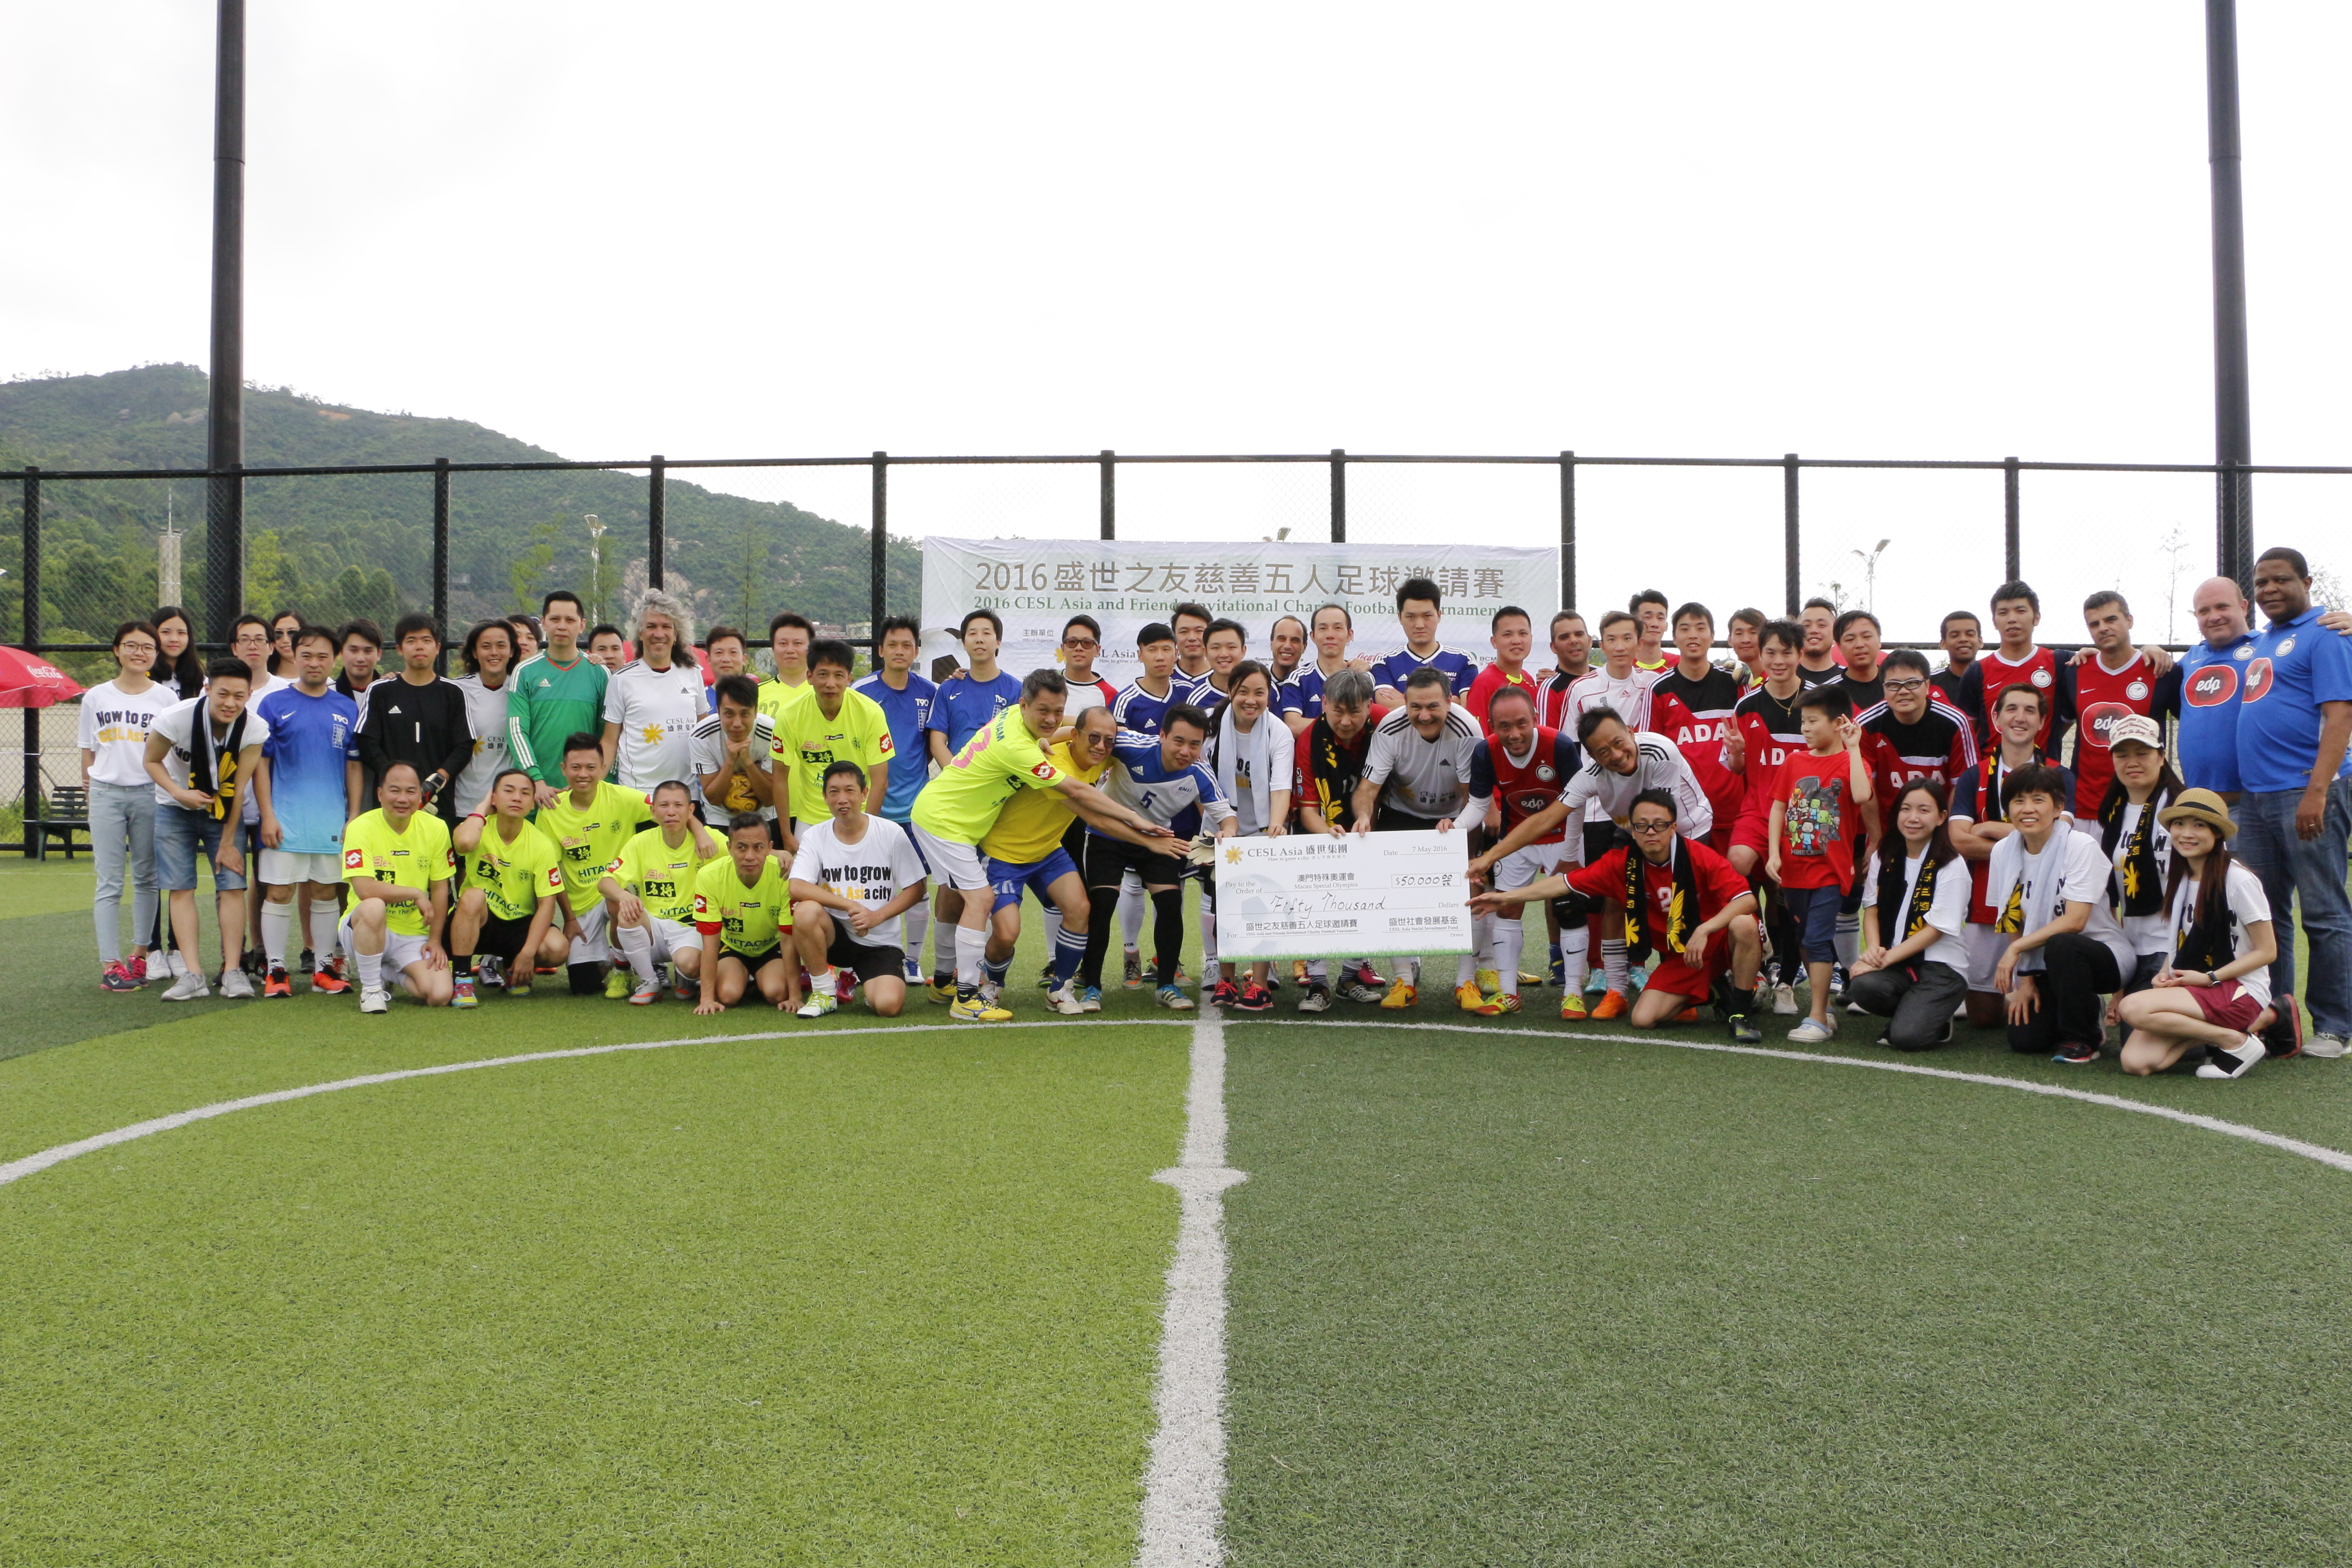 CESL Asia and Friends Invitational Charity Football Tournament 2016 (2016/05/07)